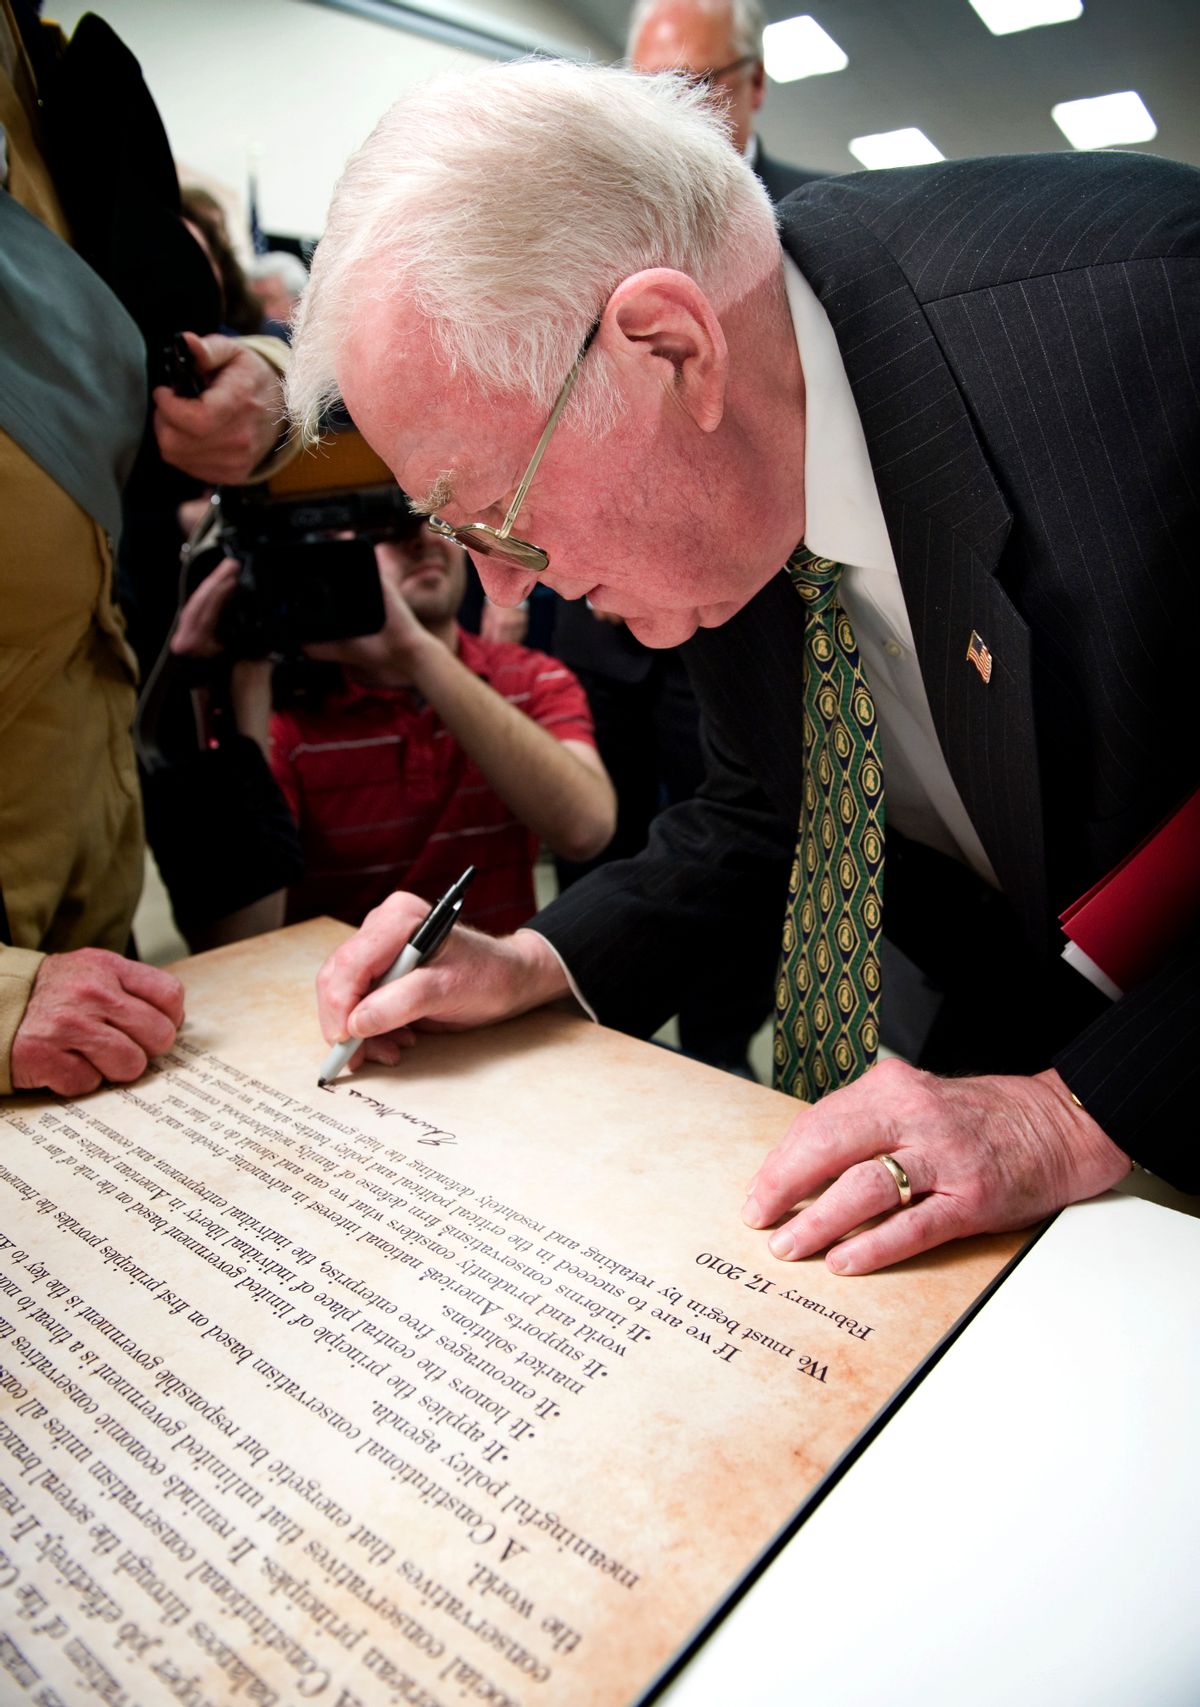 Former U.S. Attorney General Edwin Meese III, chairman of the Conservative Action Project,  signs the Mount Vernon Statement during a ceremony at Collingwood Library and Museum in Alexandria, Va., Wednesday, Feb. 17, 2010. The document defines the principles, values and beliefs of the conservative movement. (AP Photo/Cliff Owen) (Associated Press)